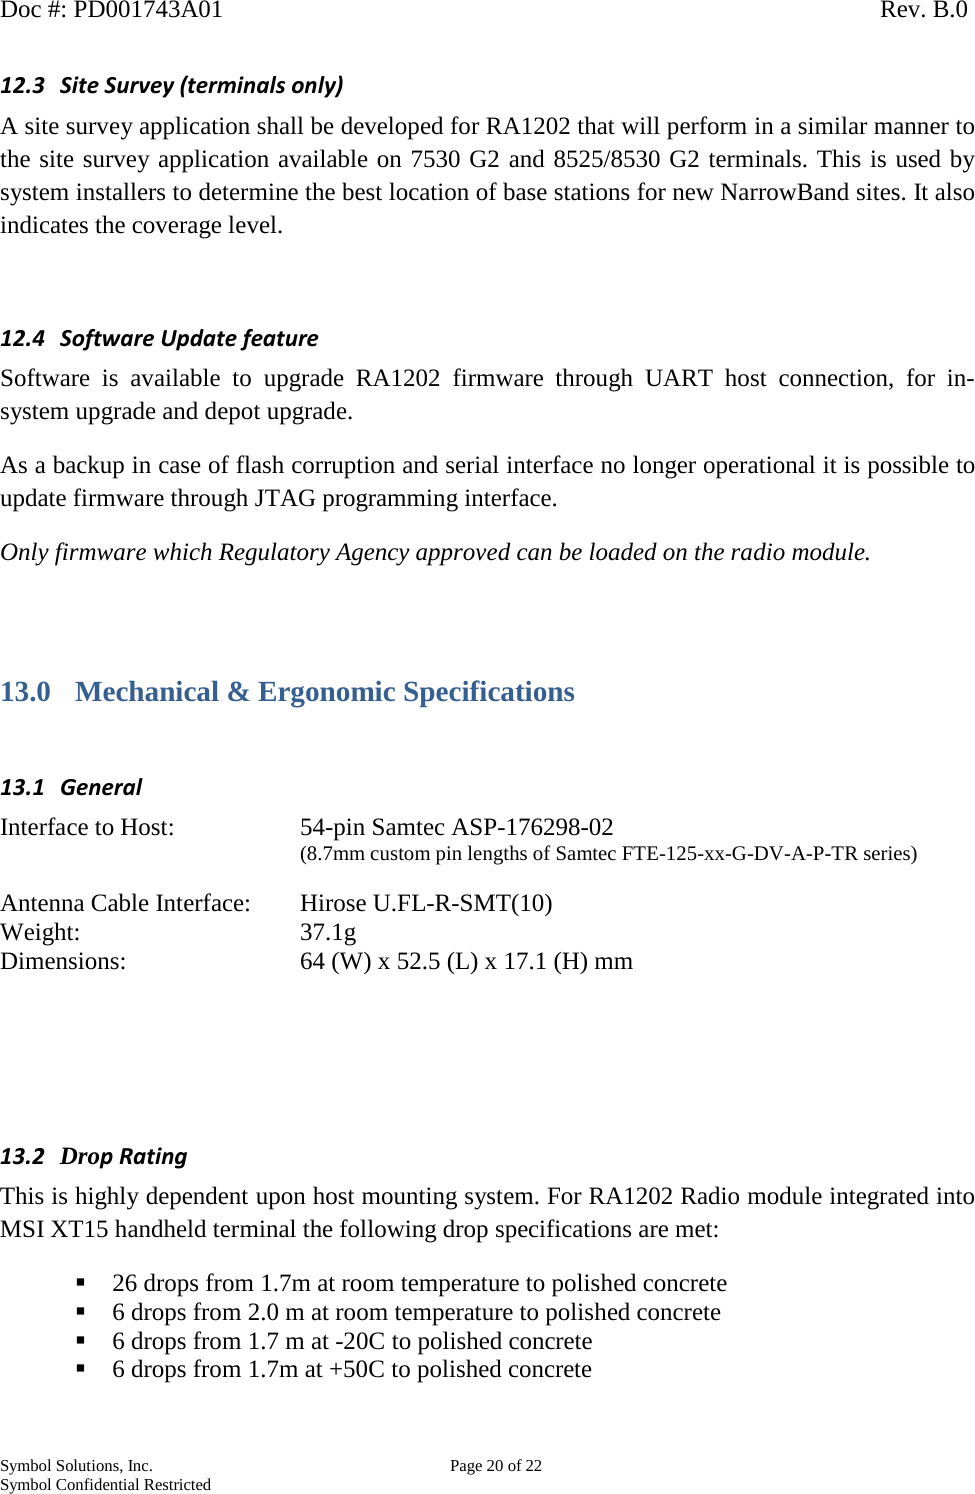 Doc #: PD001743A01                                                                                                         Rev. B.0 Symbol Solutions, Inc.    Page 20 of 22 Symbol Confidential Restricted   12.3 Site Survey (terminals only) A site survey application shall be developed for RA1202 that will perform in a similar manner to the site survey application available on 7530 G2 and 8525/8530 G2 terminals. This is used by system installers to determine the best location of base stations for new NarrowBand sites. It also indicates the coverage level.  12.4 Software Update feature Software  is available to upgrade RA1202 firmware through UART host connection, for in-system upgrade and depot upgrade.  As a backup in case of flash corruption and serial interface no longer operational it is possible to update firmware through JTAG programming interface.  Only firmware which Regulatory Agency approved can be loaded on the radio module.  13.0 Mechanical &amp; Ergonomic Specifications  13.1 General Interface to Host:     54-pin Samtec ASP-176298-02  (8.7mm custom pin lengths of Samtec FTE-125-xx-G-DV-A-P-TR series)    Antenna Cable Interface: Hirose U.FL-R-SMT(10) Weight:       37.1g  Dimensions:       64 (W) x 52.5 (L) x 17.1 (H) mm     13.2 Drop Rating This is highly dependent upon host mounting system. For RA1202 Radio module integrated into MSI XT15 handheld terminal the following drop specifications are met:  26 drops from 1.7m at room temperature to polished concrete  6 drops from 2.0 m at room temperature to polished concrete   6 drops from 1.7 m at -20C to polished concrete  6 drops from 1.7m at +50C to polished concrete  